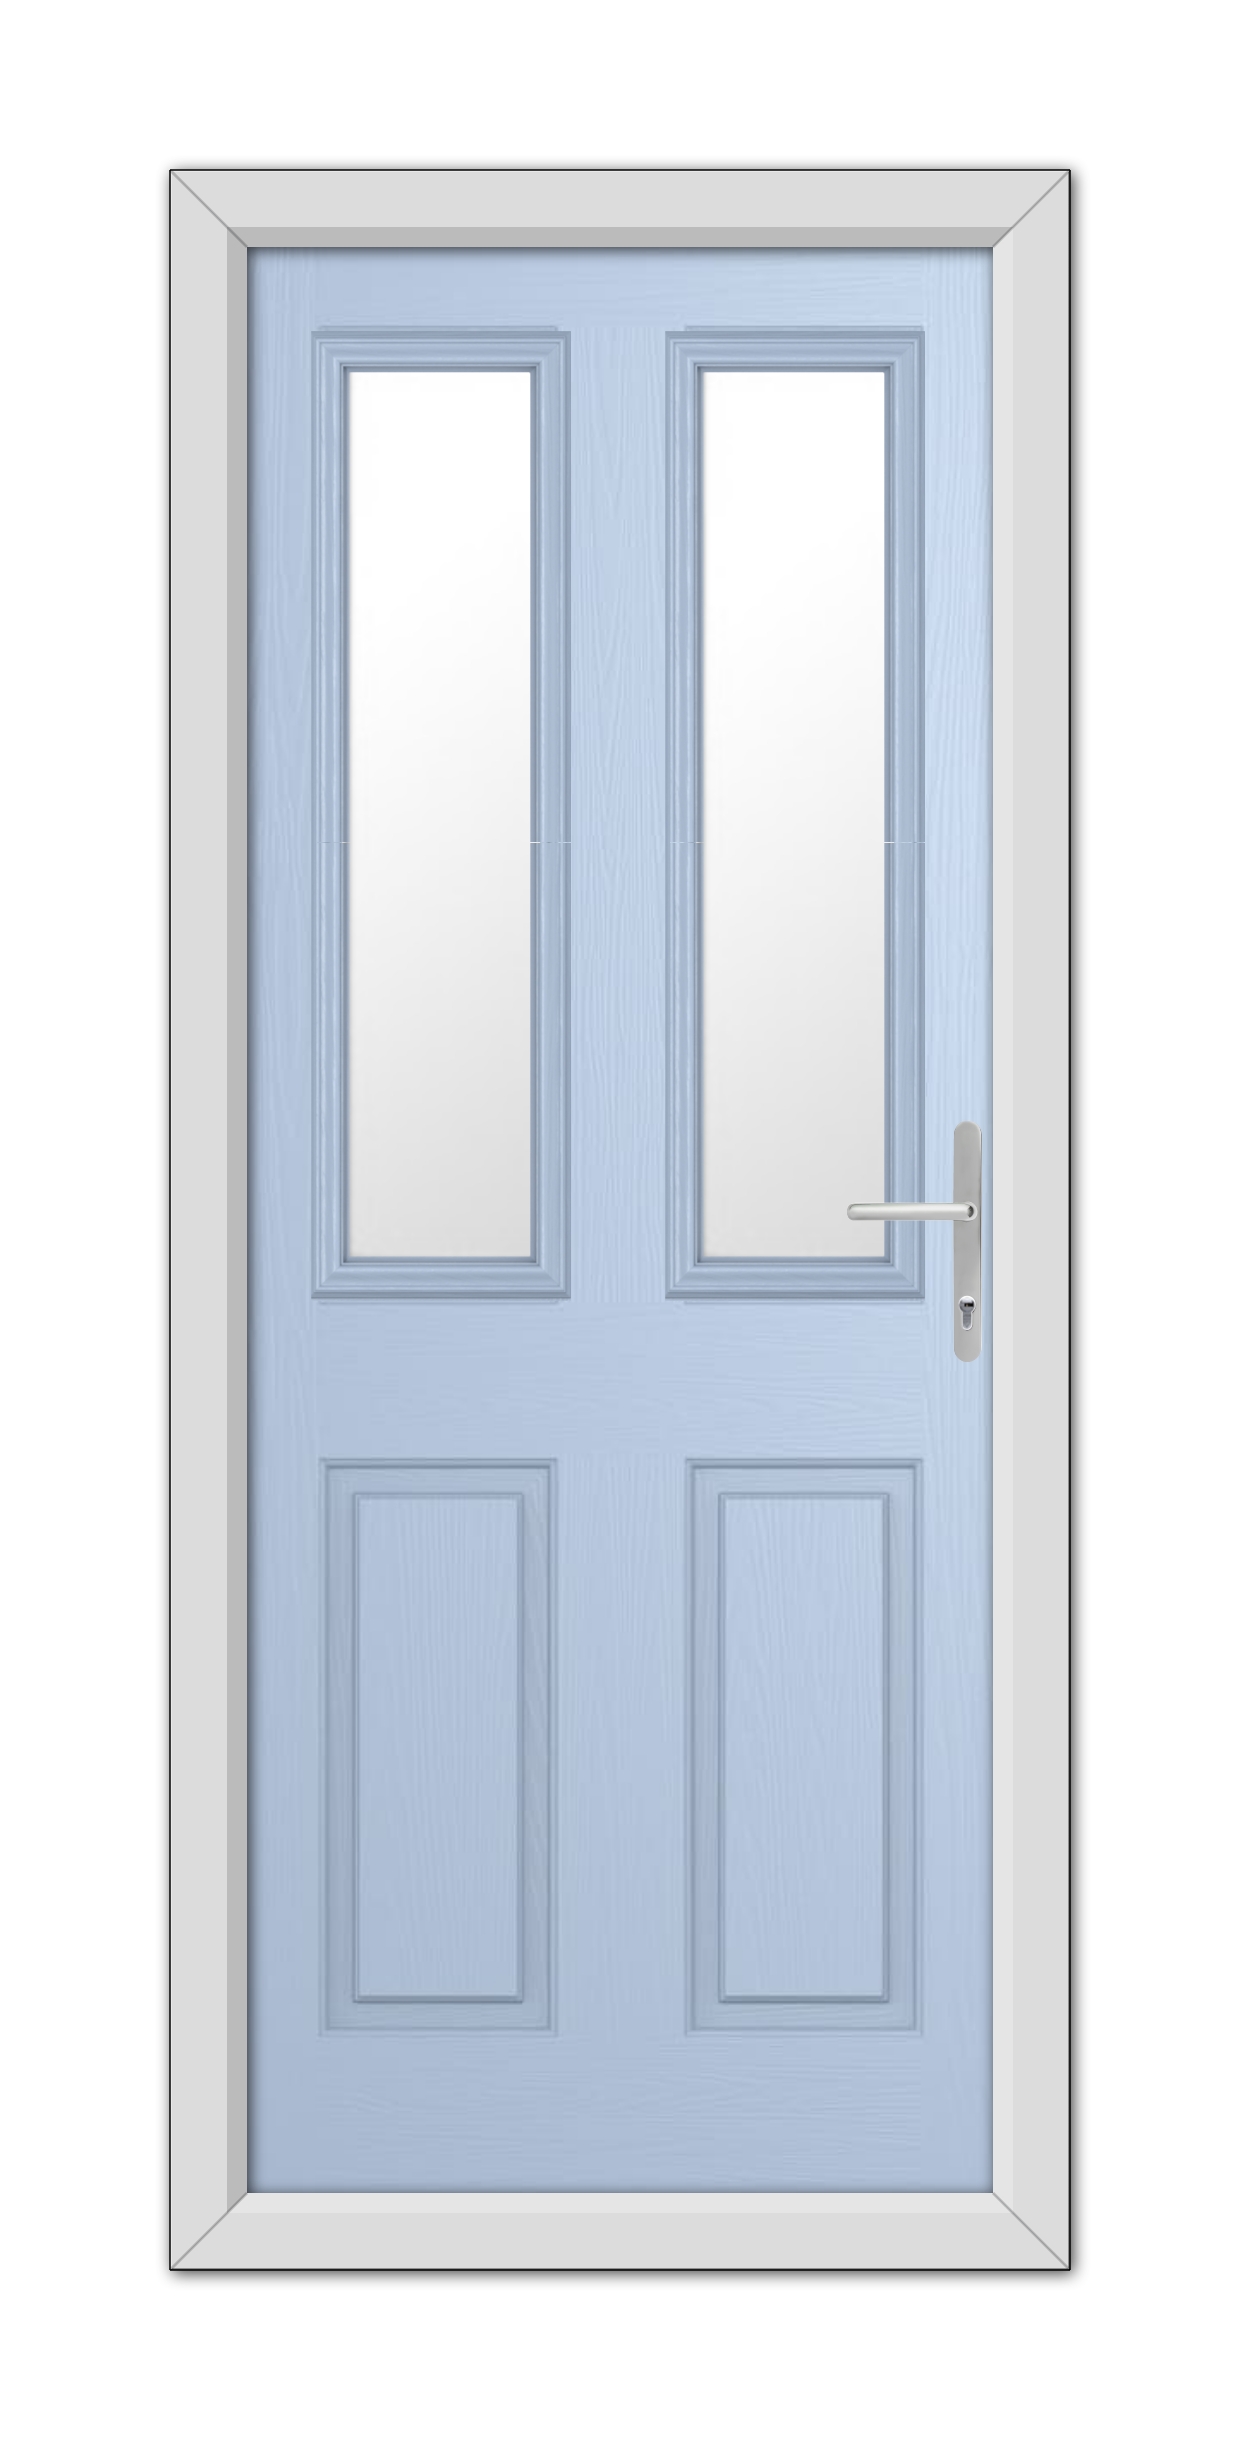 A Duck Egg Blue Whitmore Composite Door 48mm Timber Core with rectangular panels and glass top halves, featuring a silver handle on the right, set in a white frame.